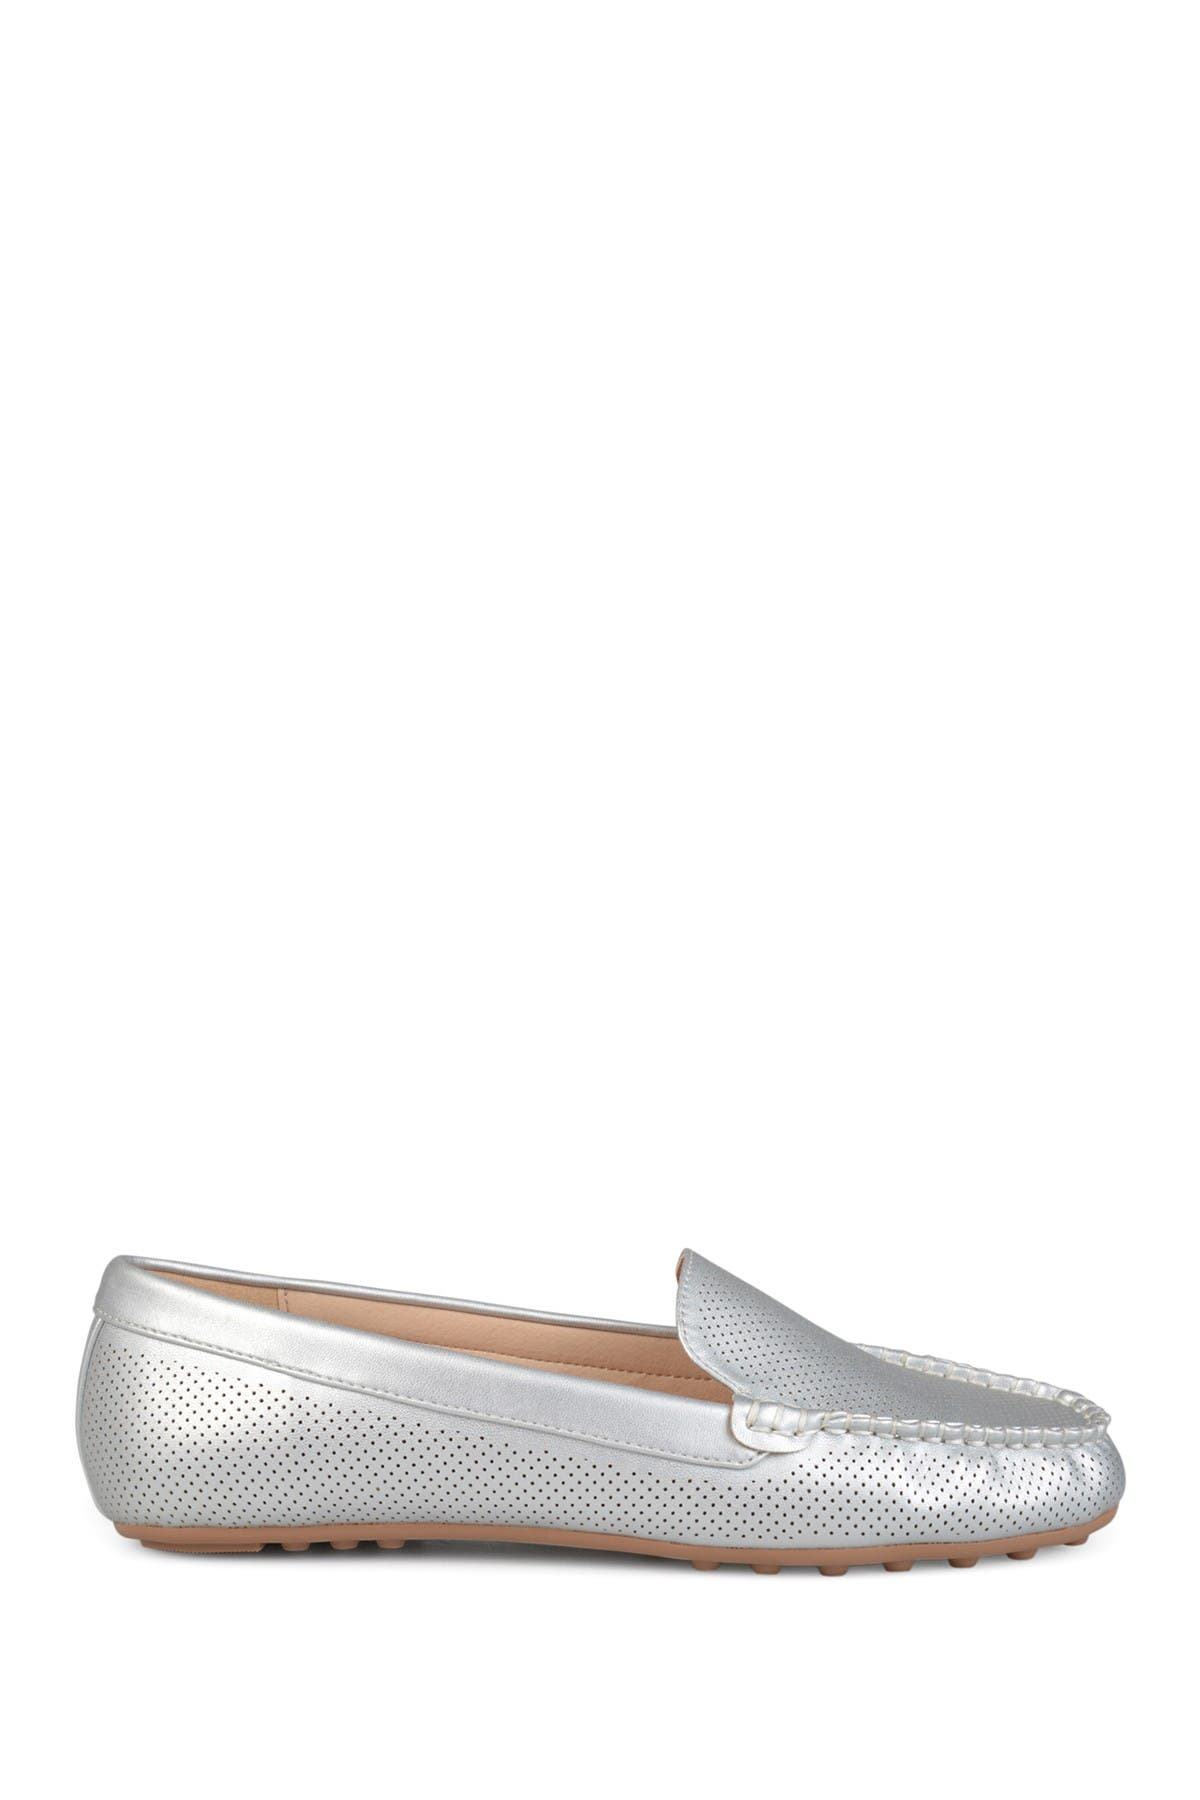 journee collection halsey loafer